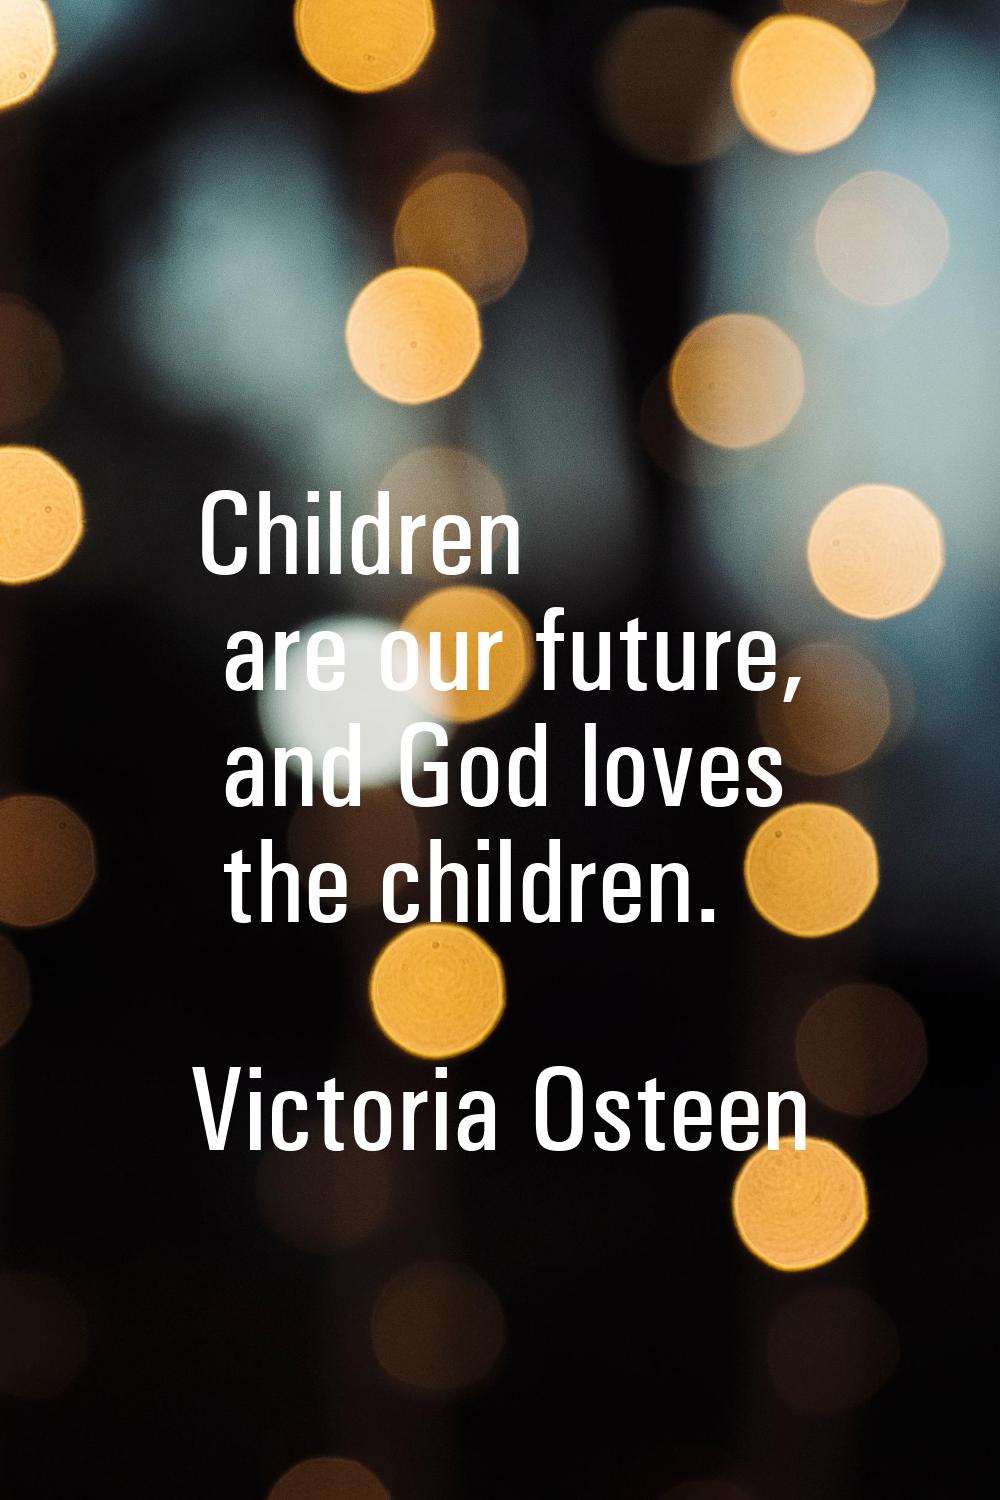 Children are our future, and God loves the children.